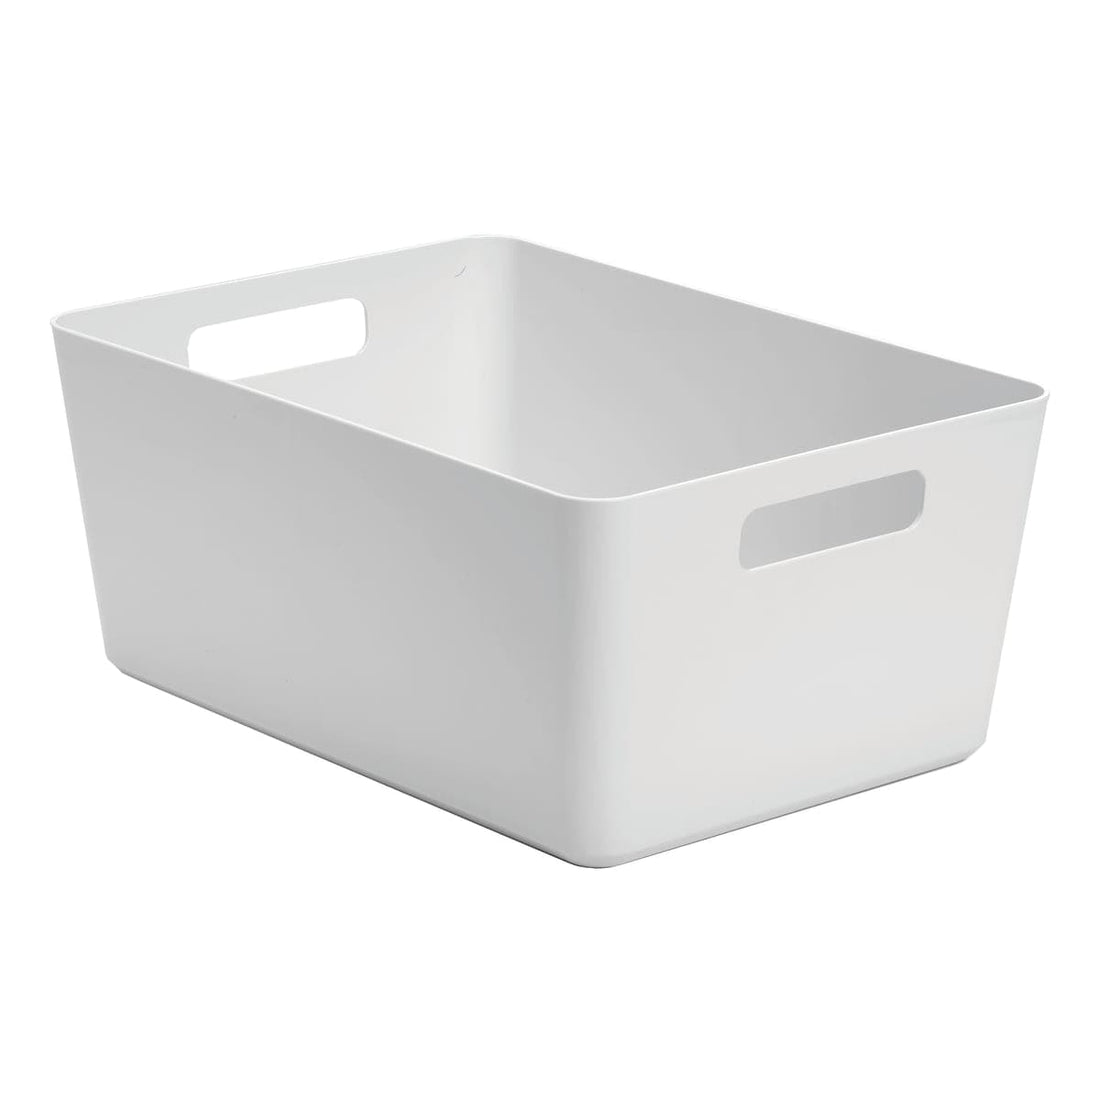 CONTAINER WITH LID R-BOX1 LARGE WHITE 33X24X14 CM